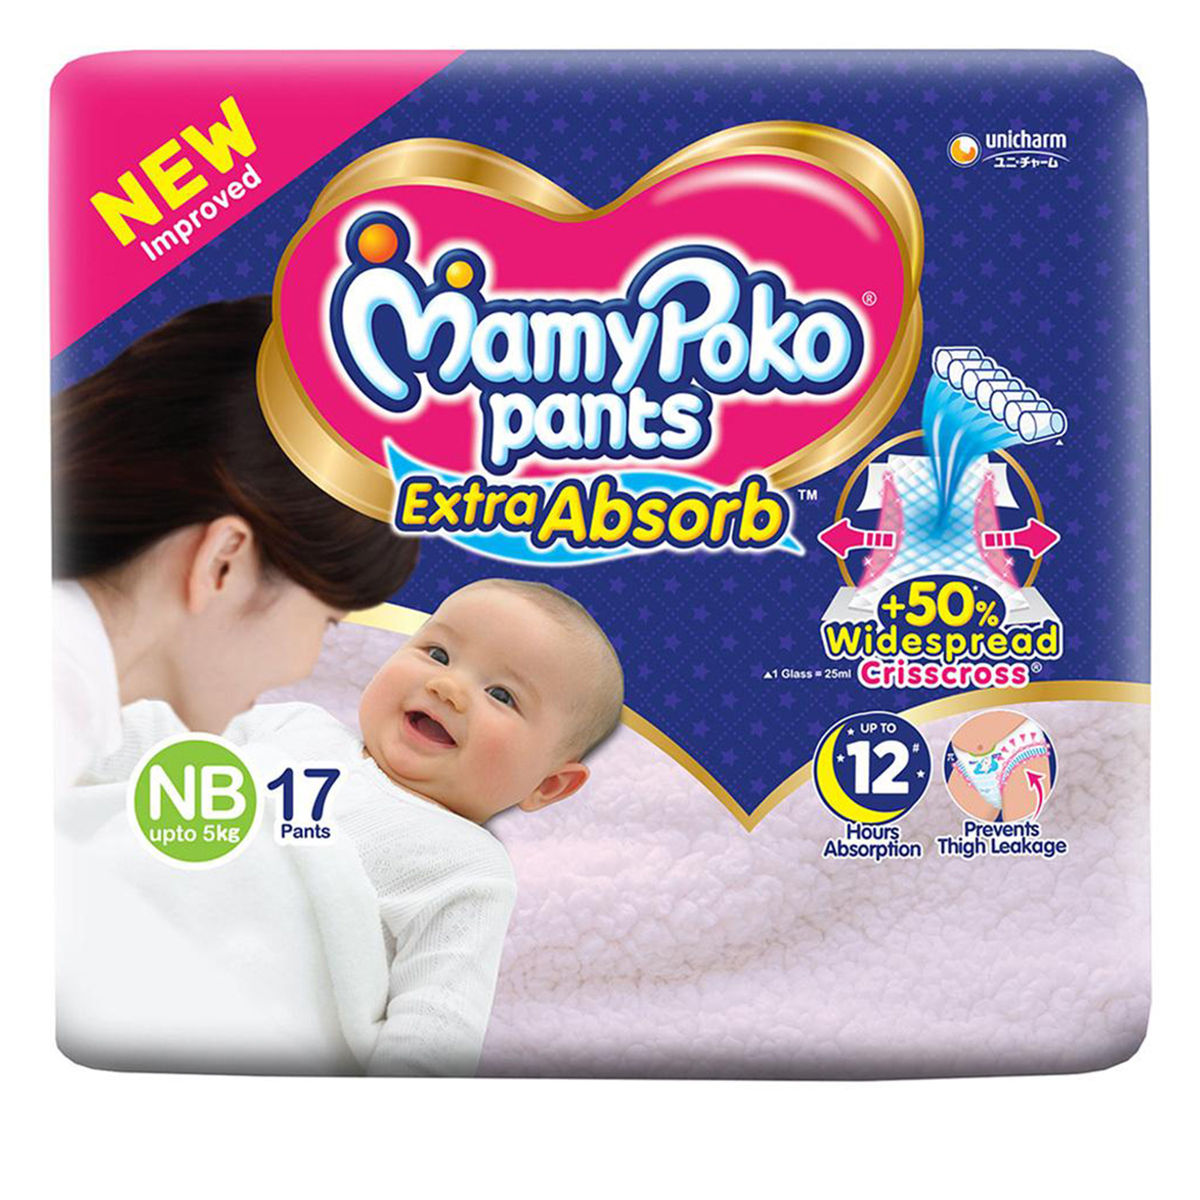 Buy MamyPoko Pants Extra Absorb Diapers New BornXSmall NBXS76 Count  Upto 5kg Online at Low Prices in India  Amazonin